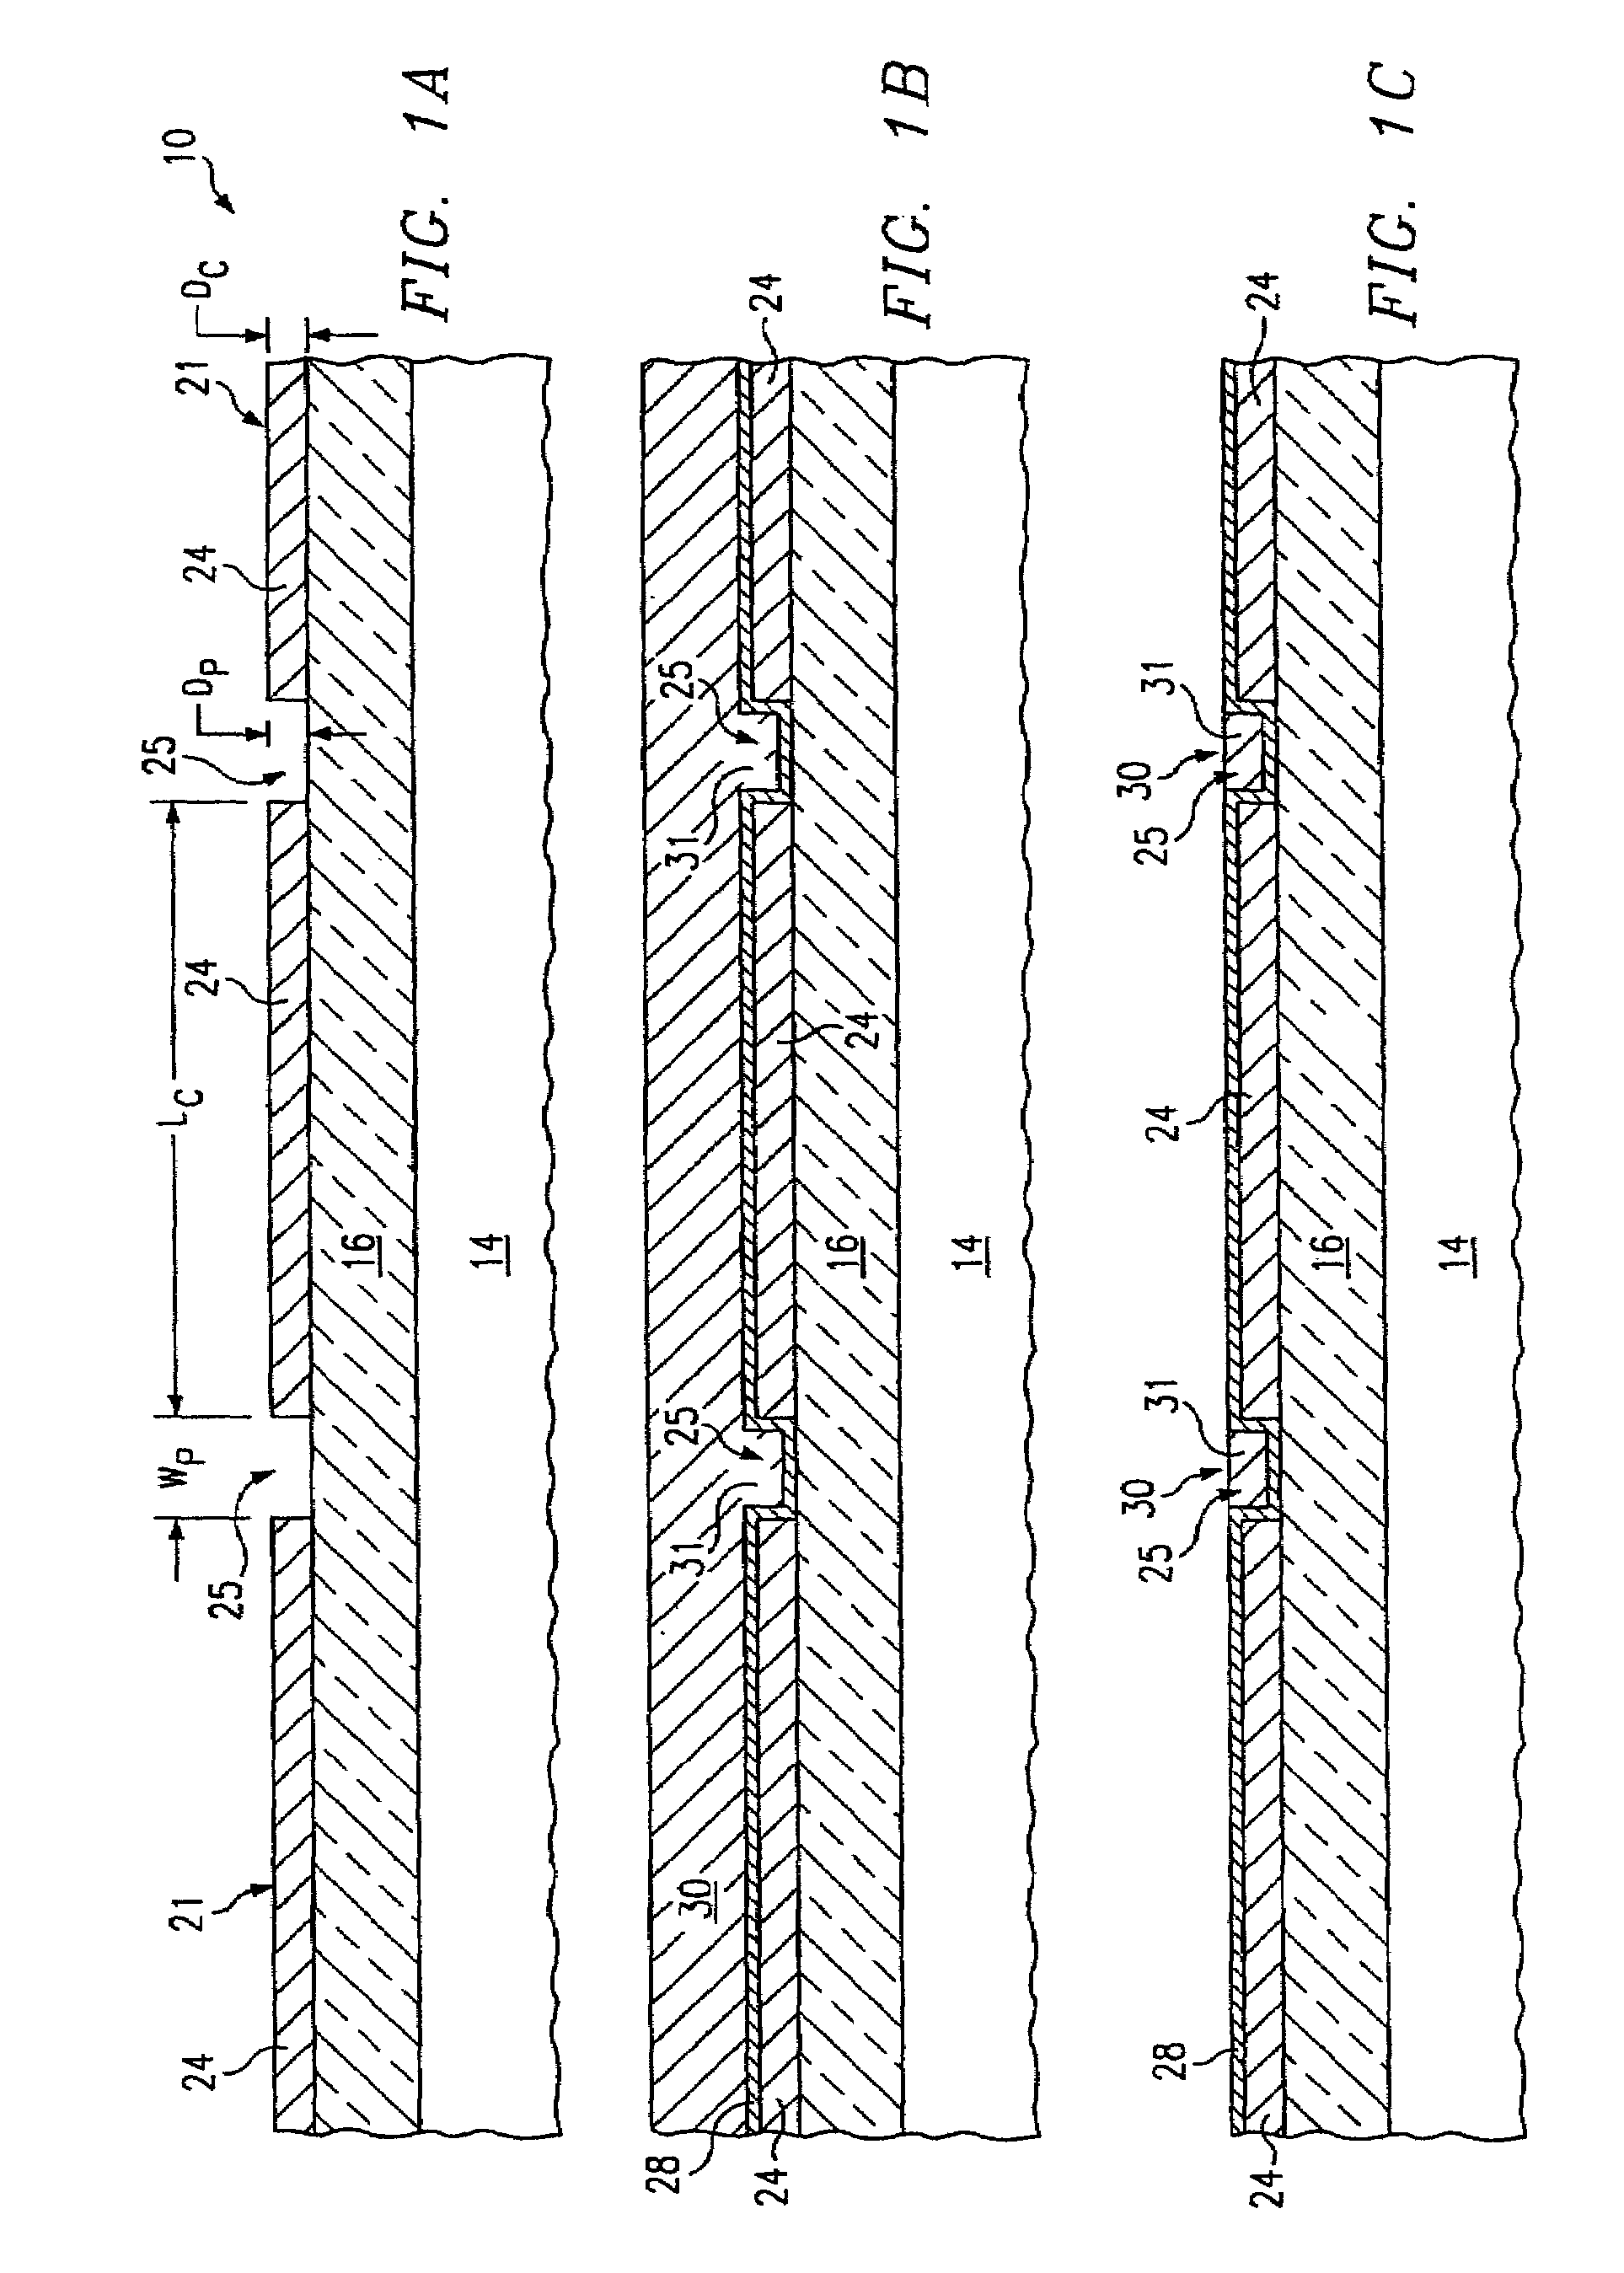 Method of forming electrical interconnects having electromigration-inhibiting segments relative to a critical length